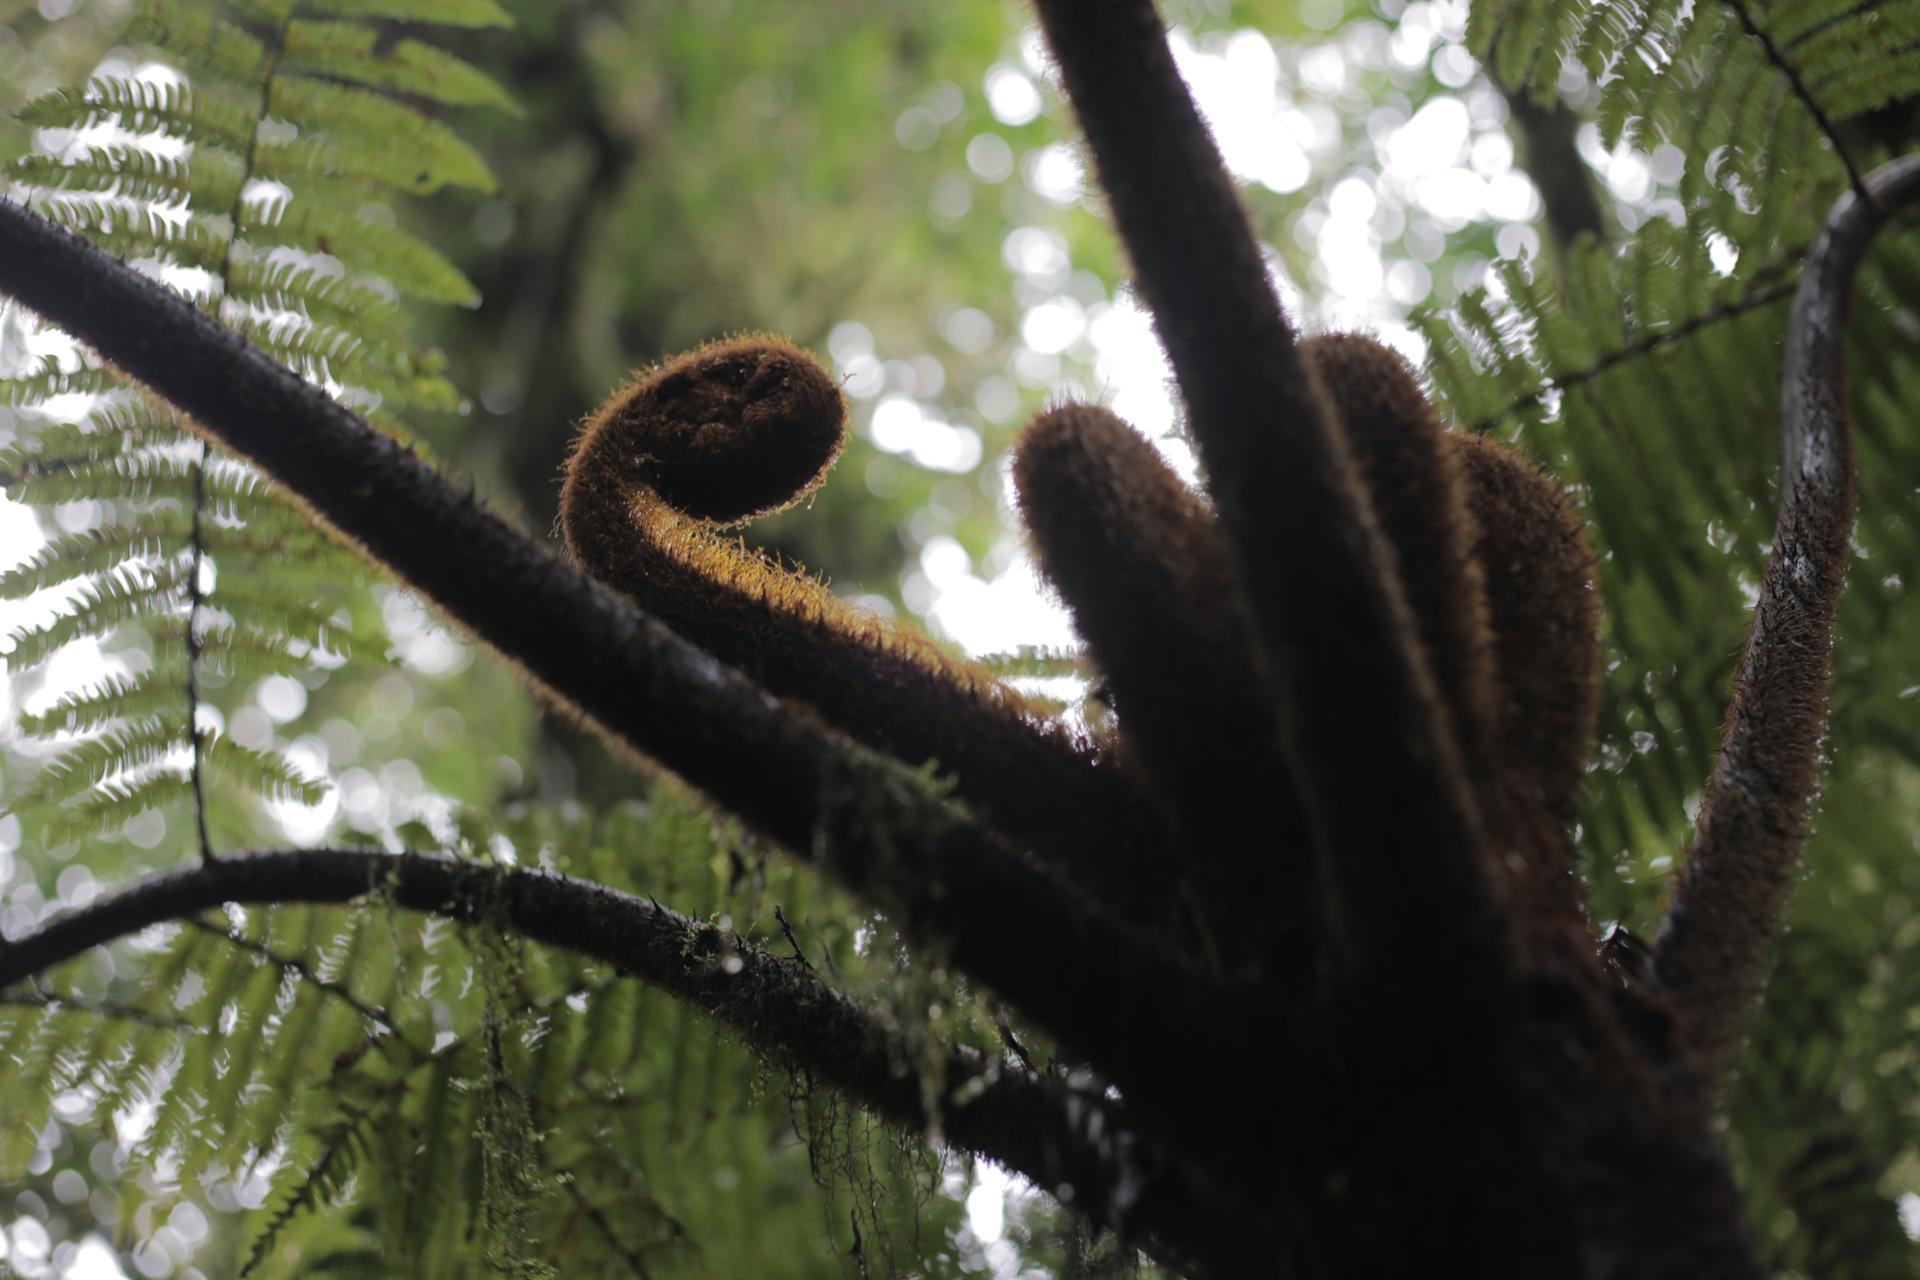 Costa Rica’s Monteverde Cloud Forest Biological Preserve is home to species that thrive in a unique ecosystem which is nearly permanently in the clouds.